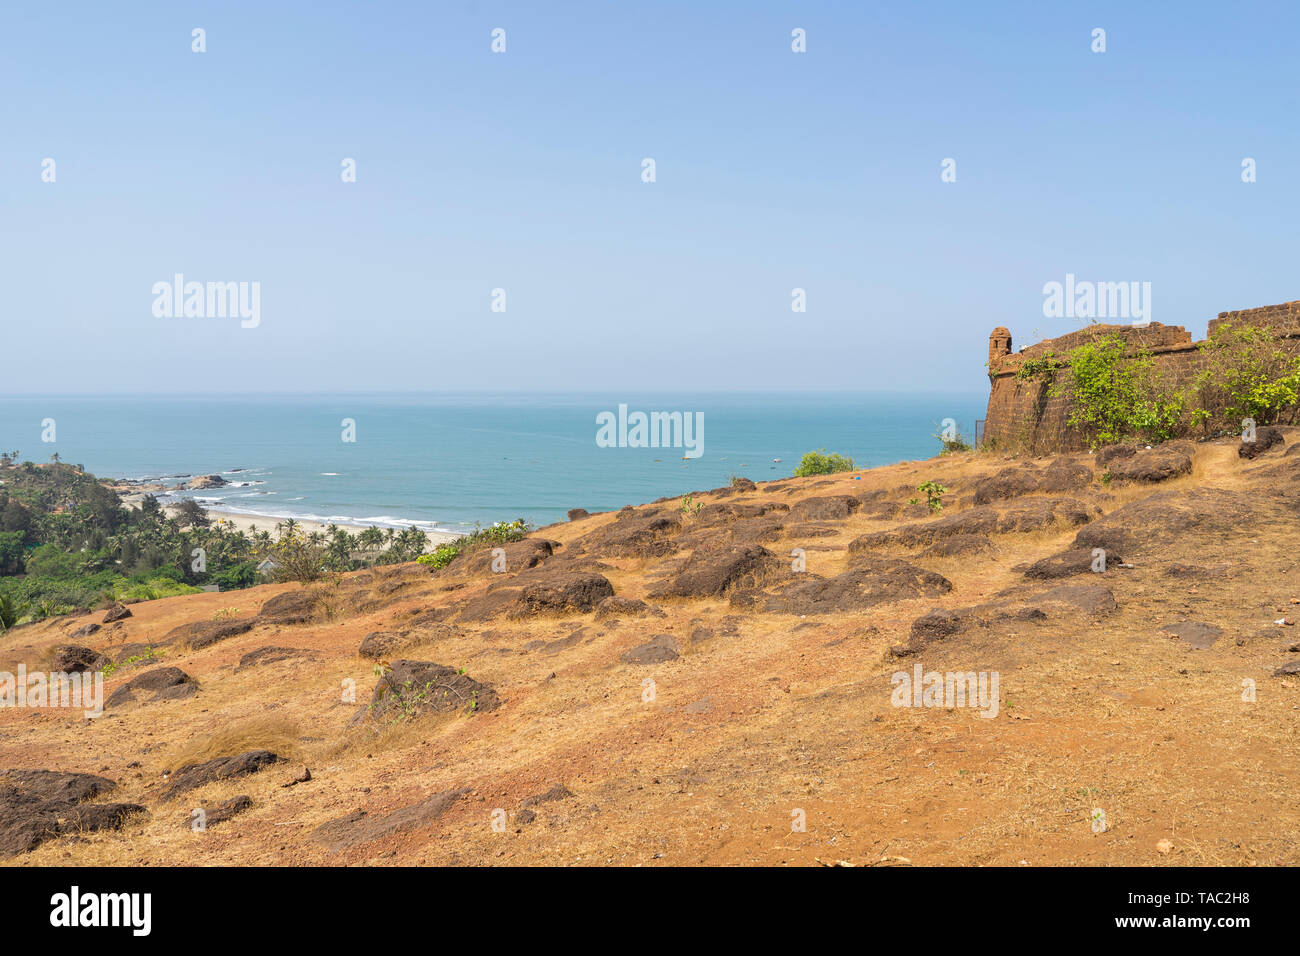 Anjuna, Goa / India - 04 03 2019, Chapora Fort in the northern Goa, India. Old ruins on top of hill. Stock Photo